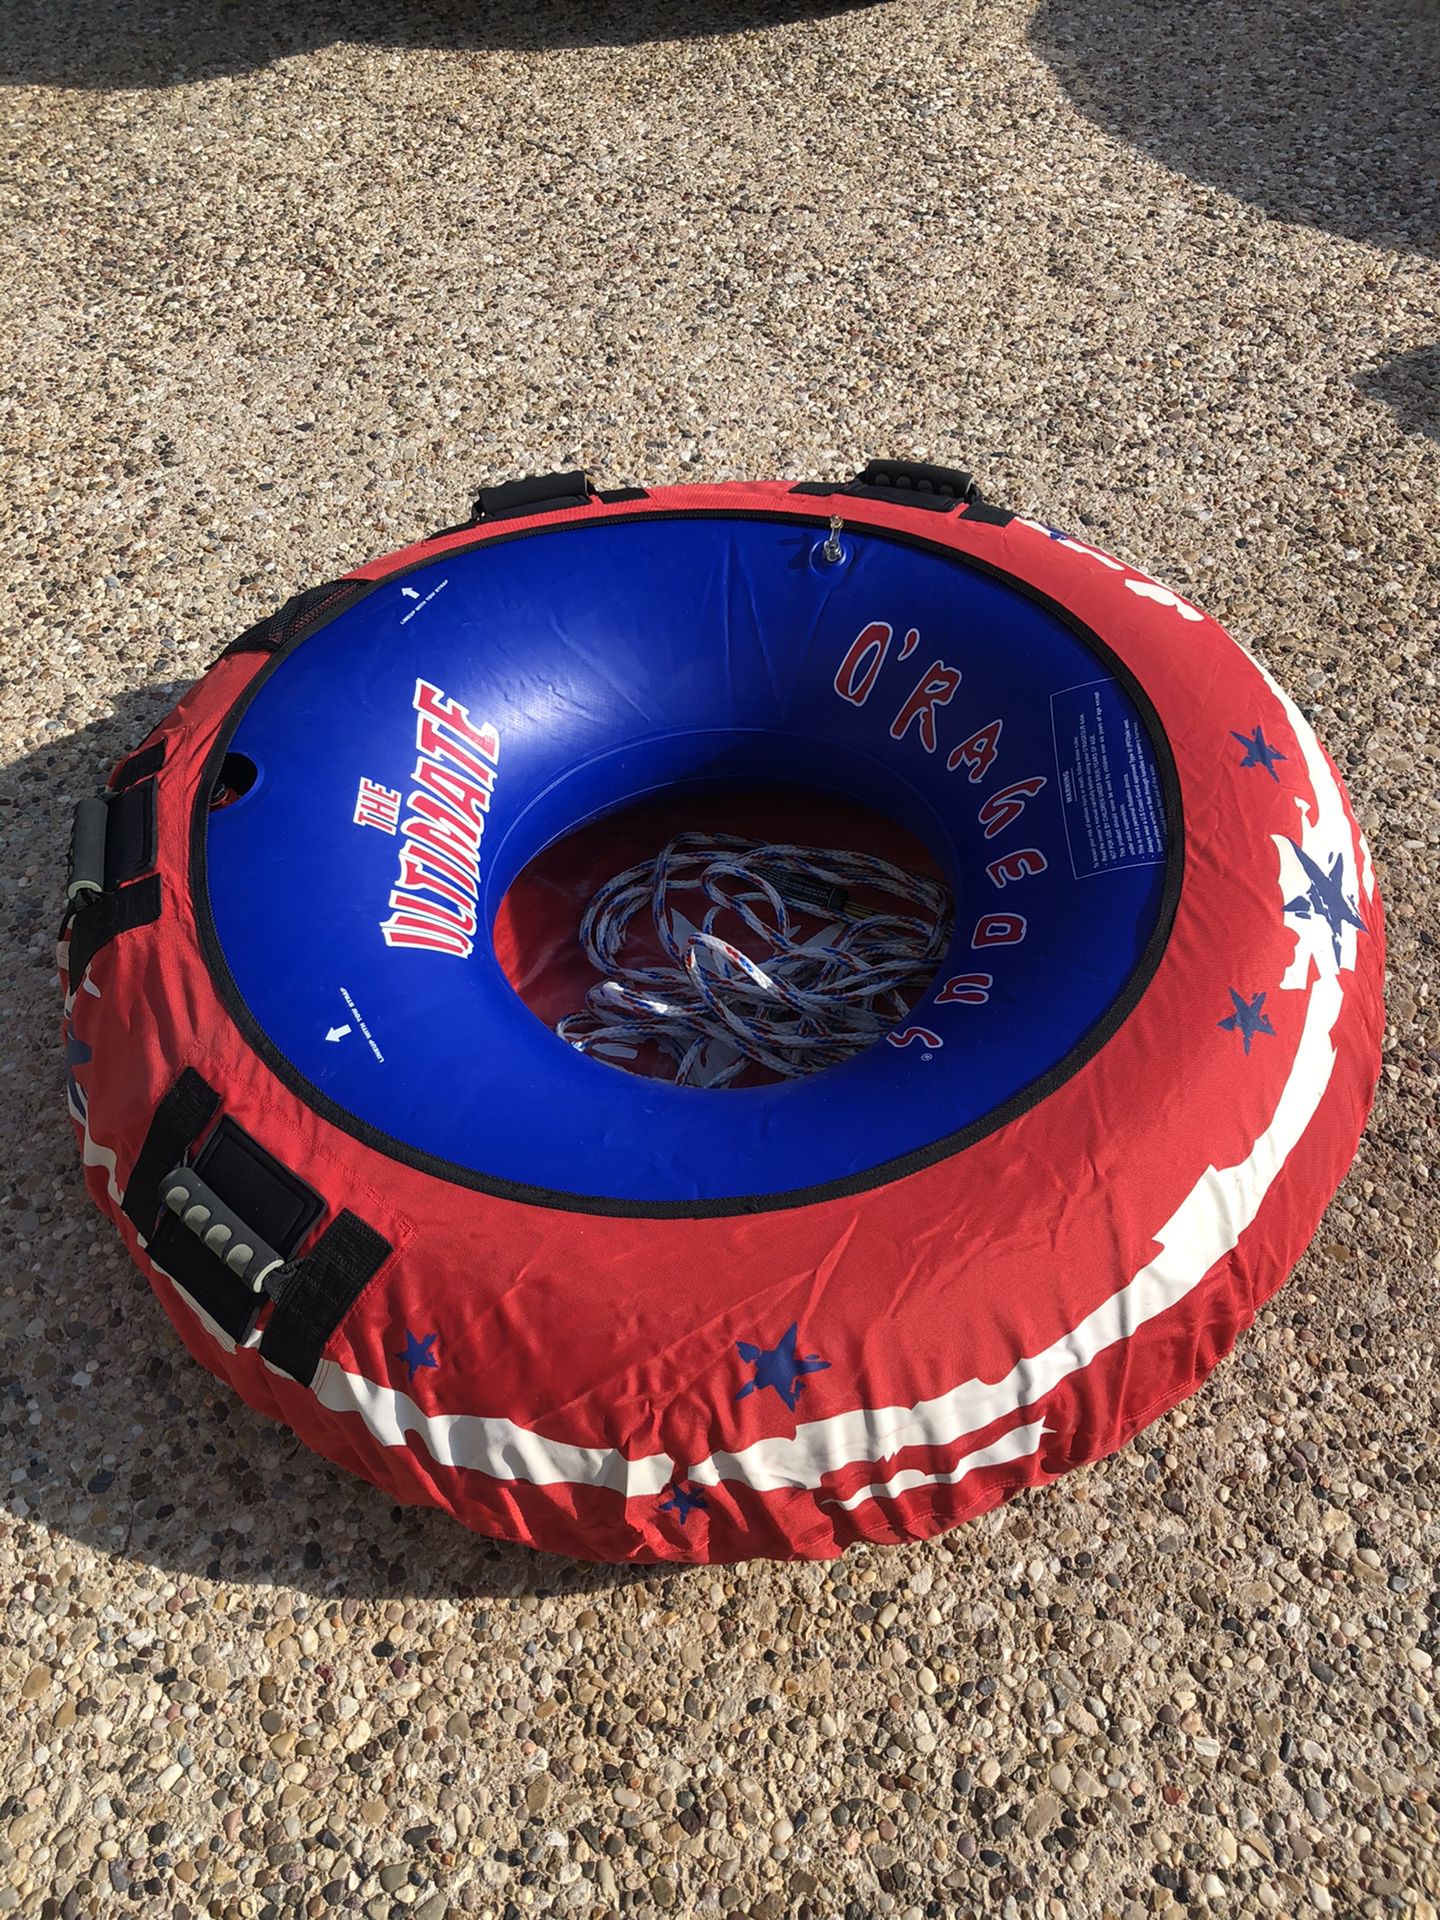 Boat towable tube with tow rope